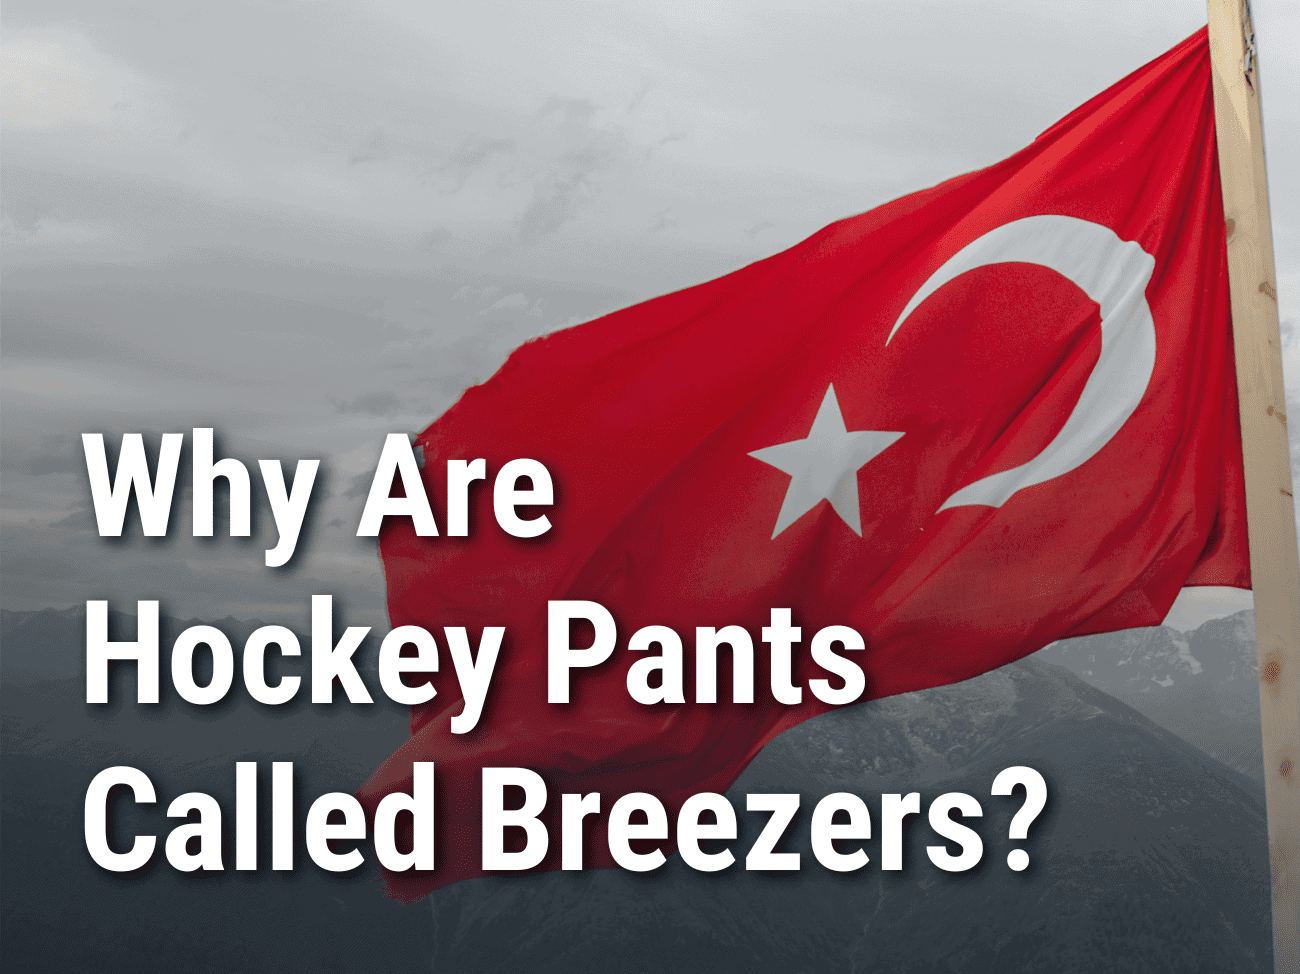 Why Are Hockey Pants Called Breezers?